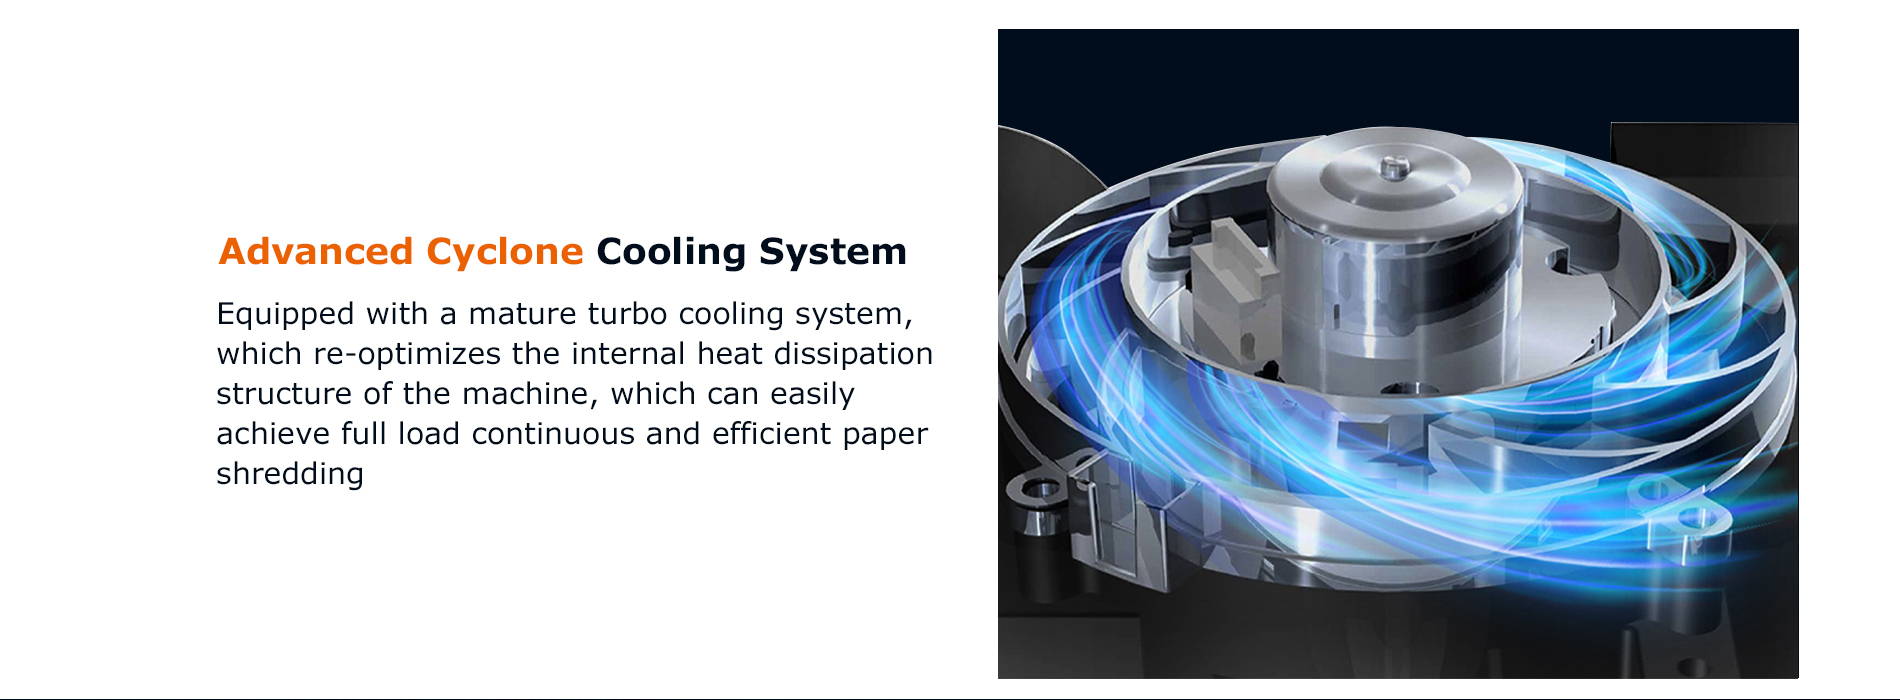 Advanced Cyclone Cooling System  Equipped with a mature turbo cooling system, which re-optimizes the internal heat dissipation structure of the machine, which can easily achieve full load continuous and efficient paper shredding